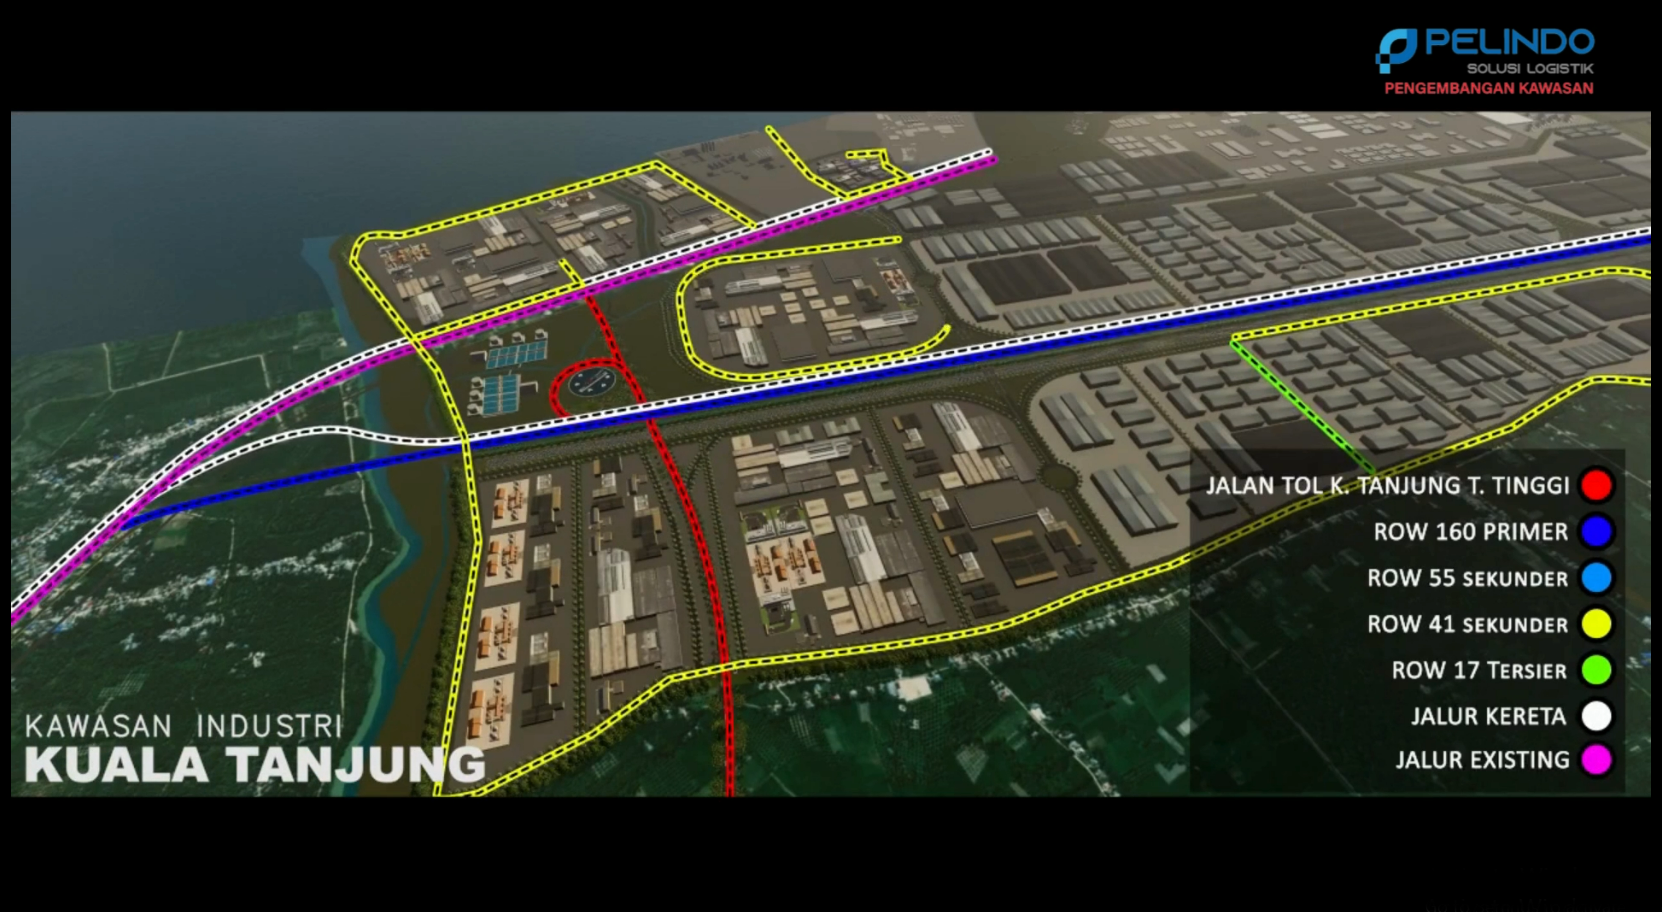 Kuala Tanjung Industrial Area: Transformation of Industrial Development Towards Integration and Sustainability